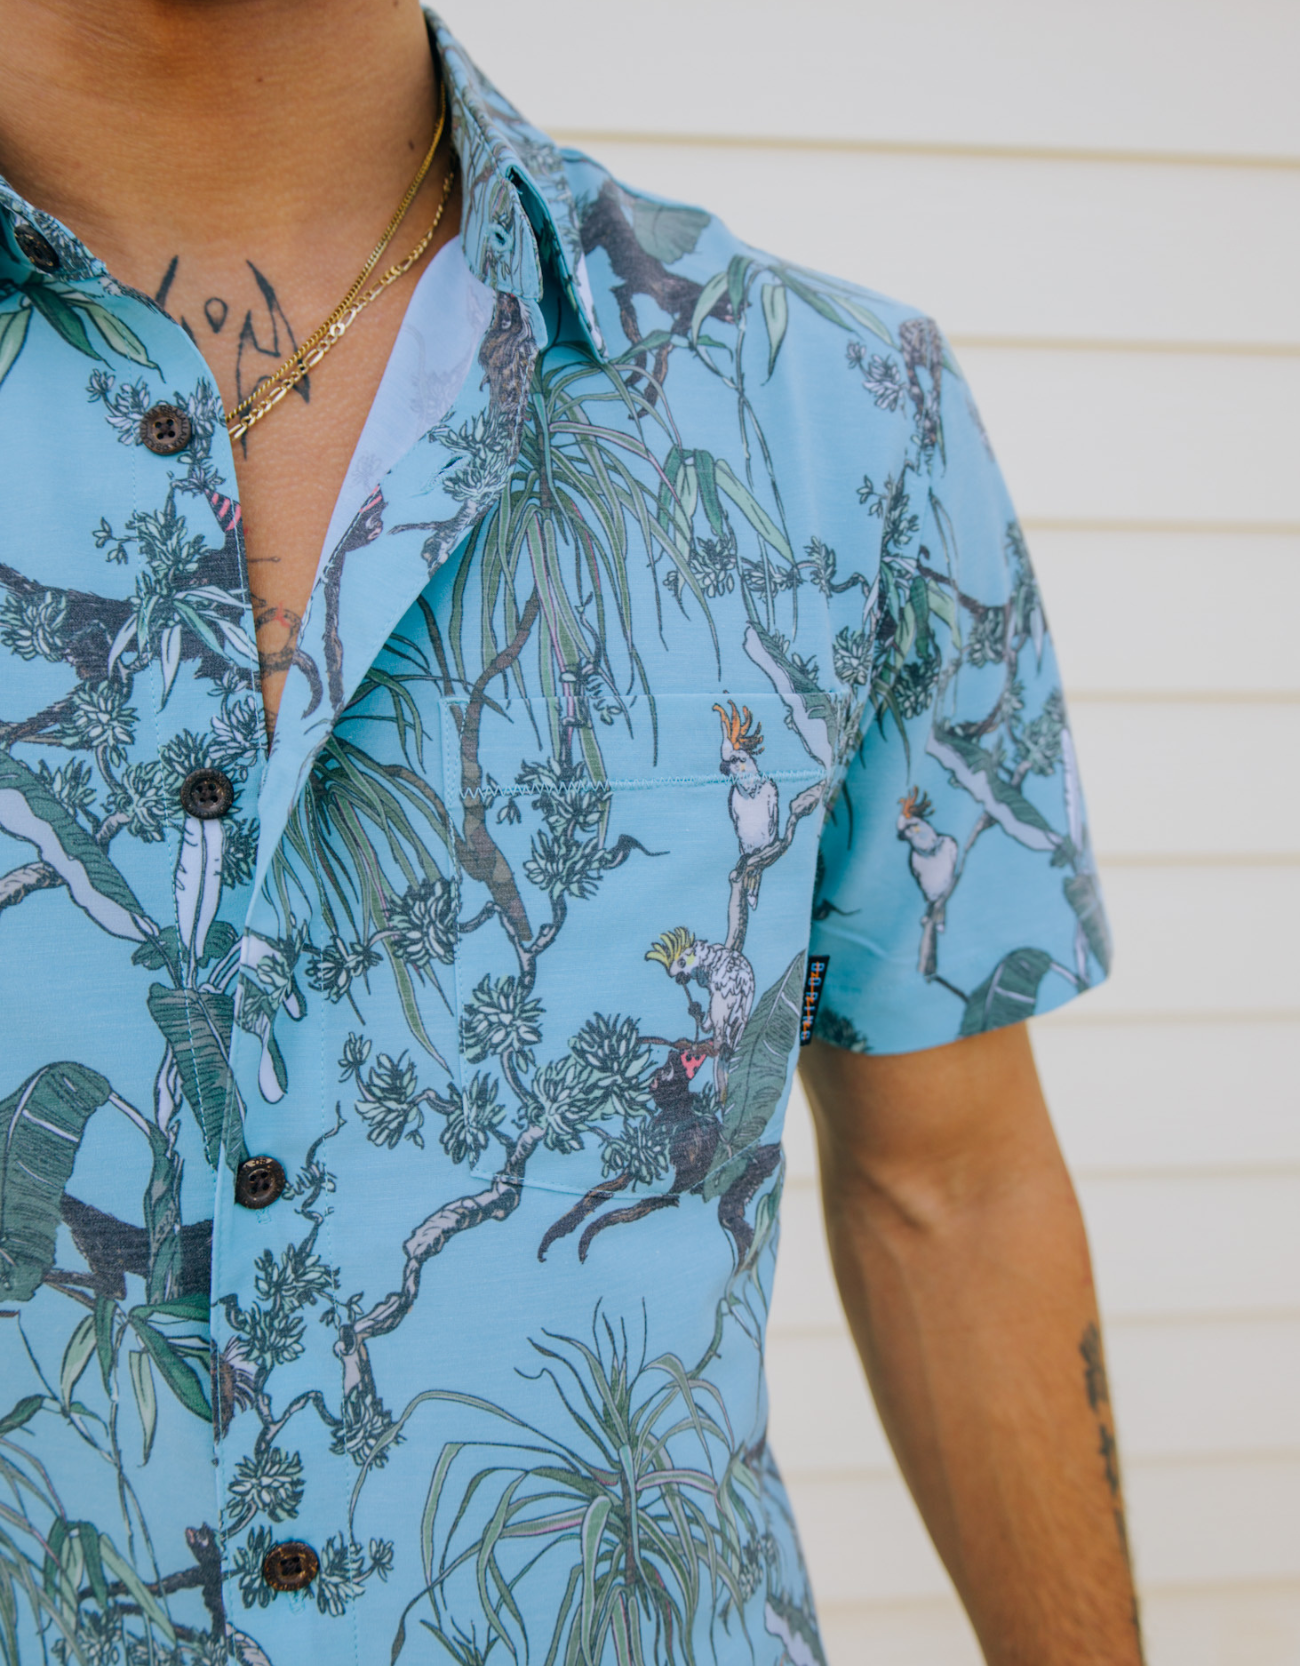 ON OUR WAY UP - VAGABOND™ BUTTON UP by Bajallama